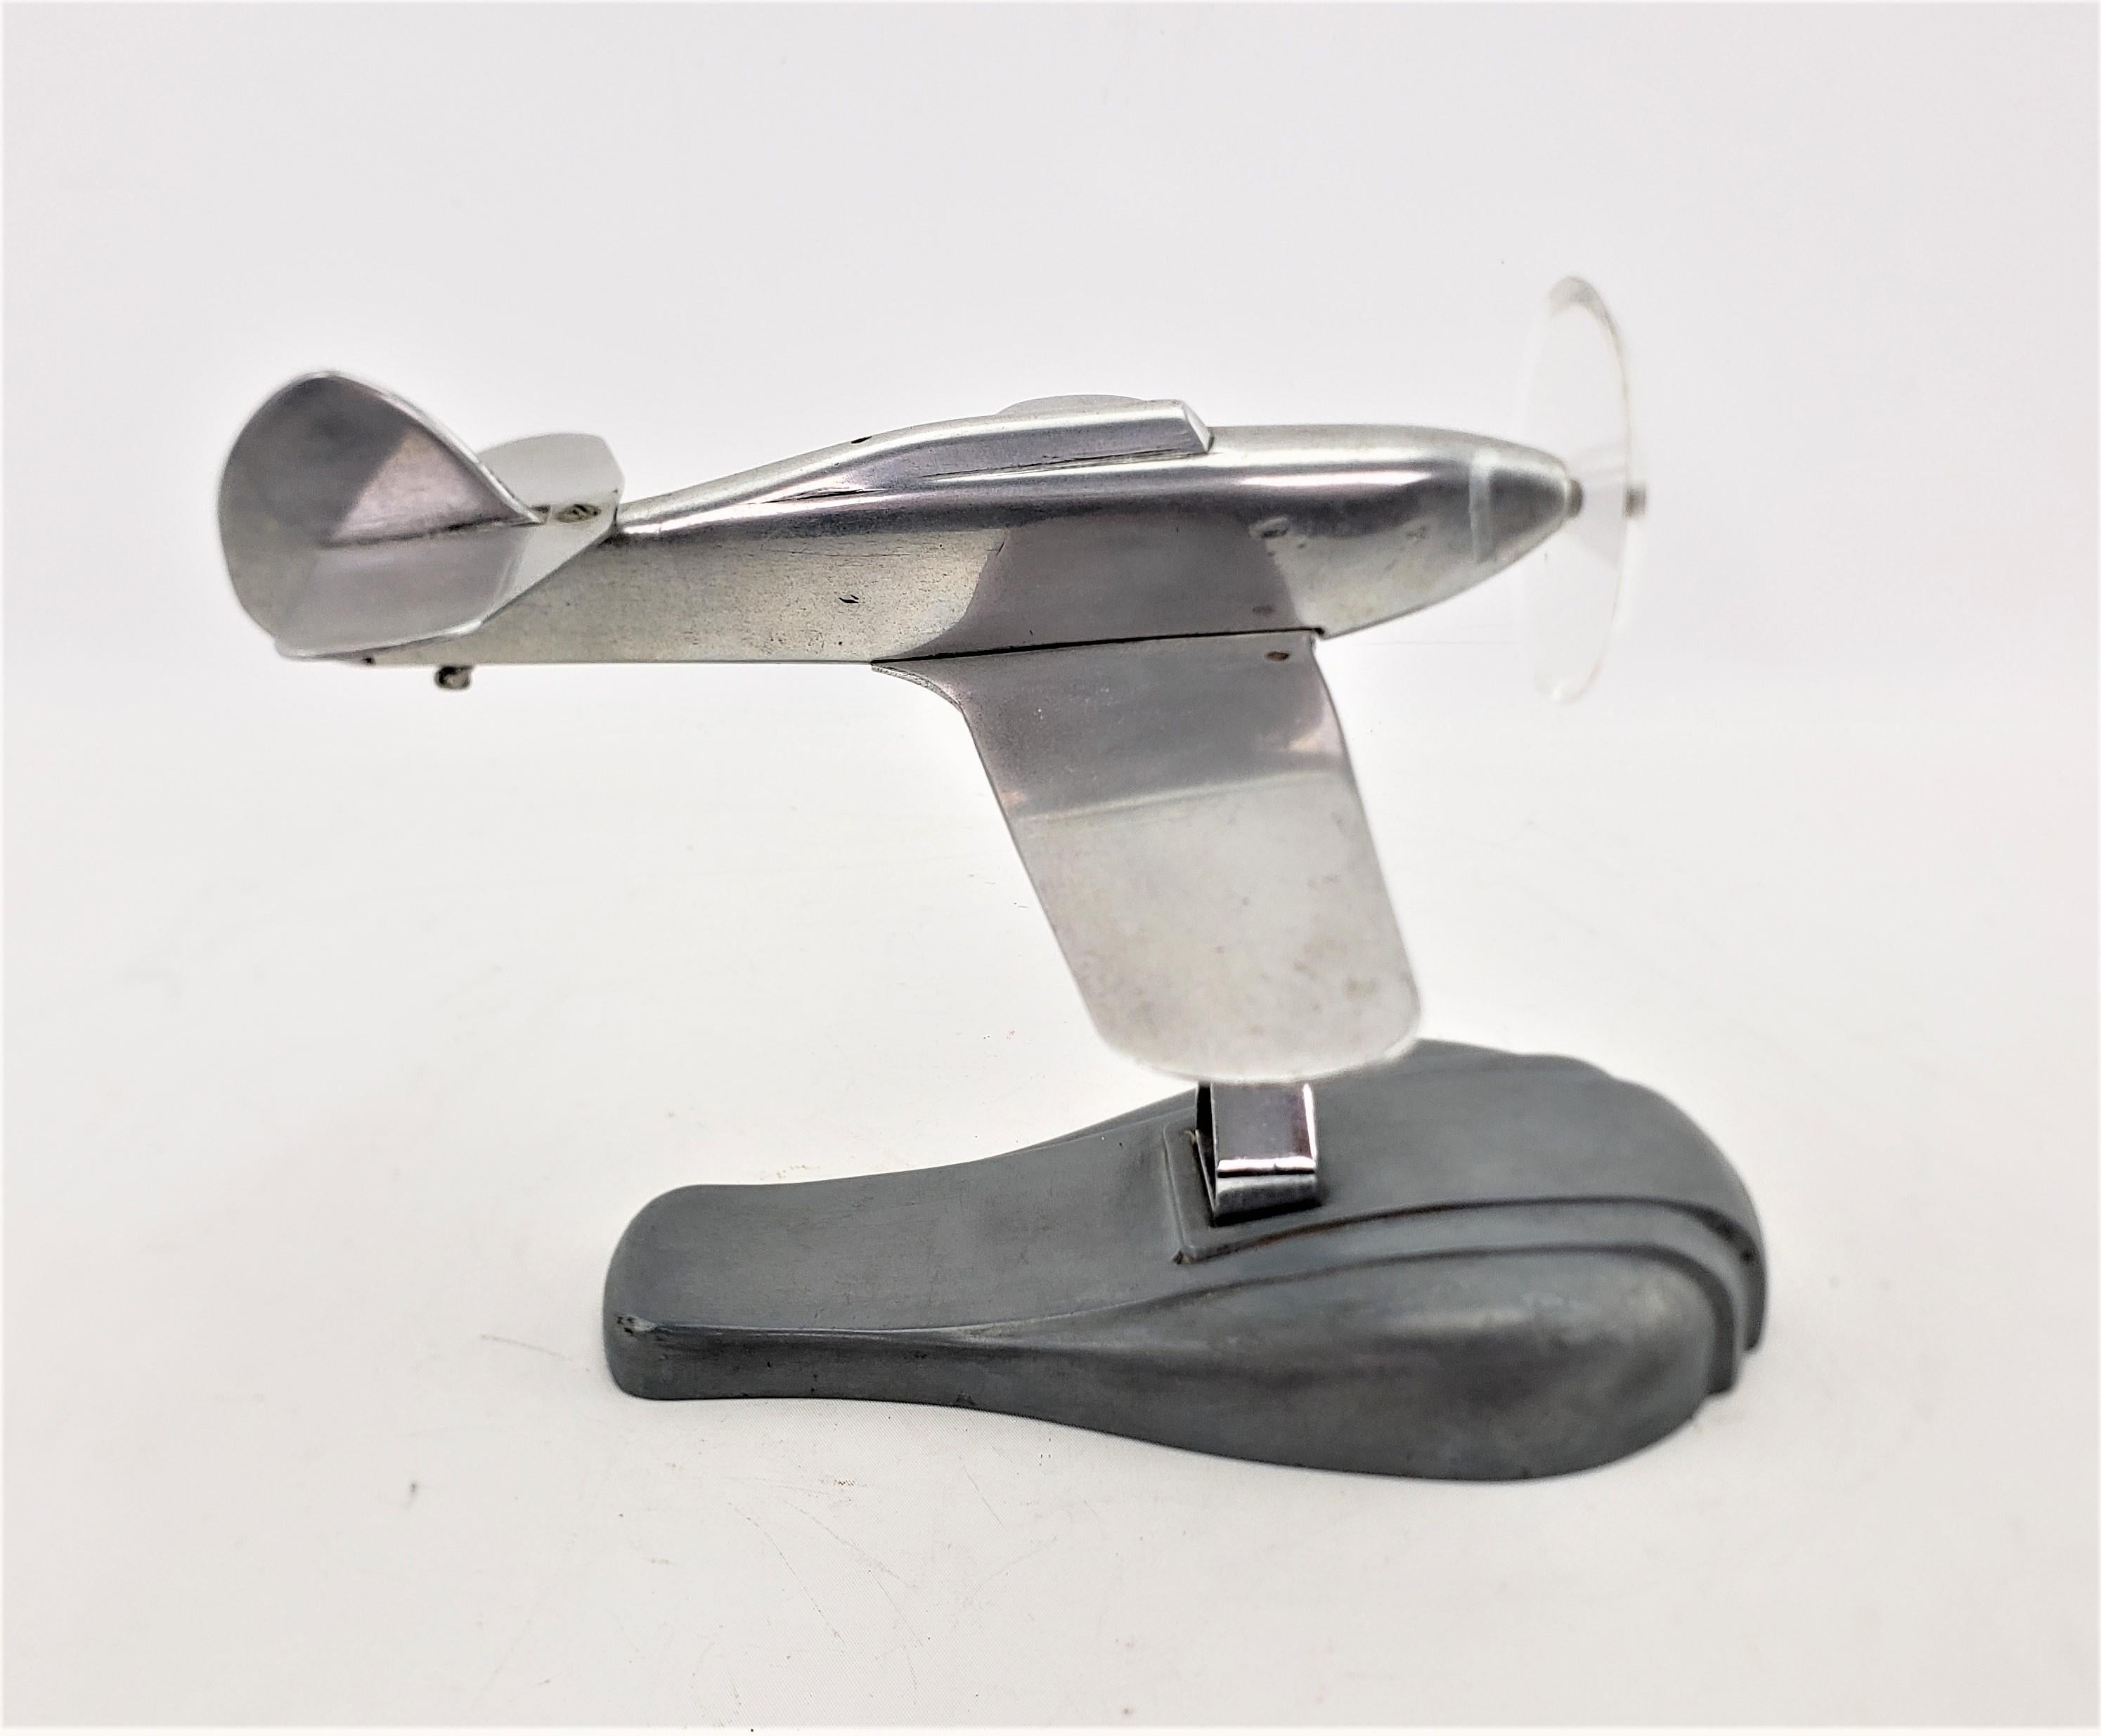 20th Century Mid-Century Modern Cast Aluminum Stylized Airplane Model or Sculpture & Stand For Sale